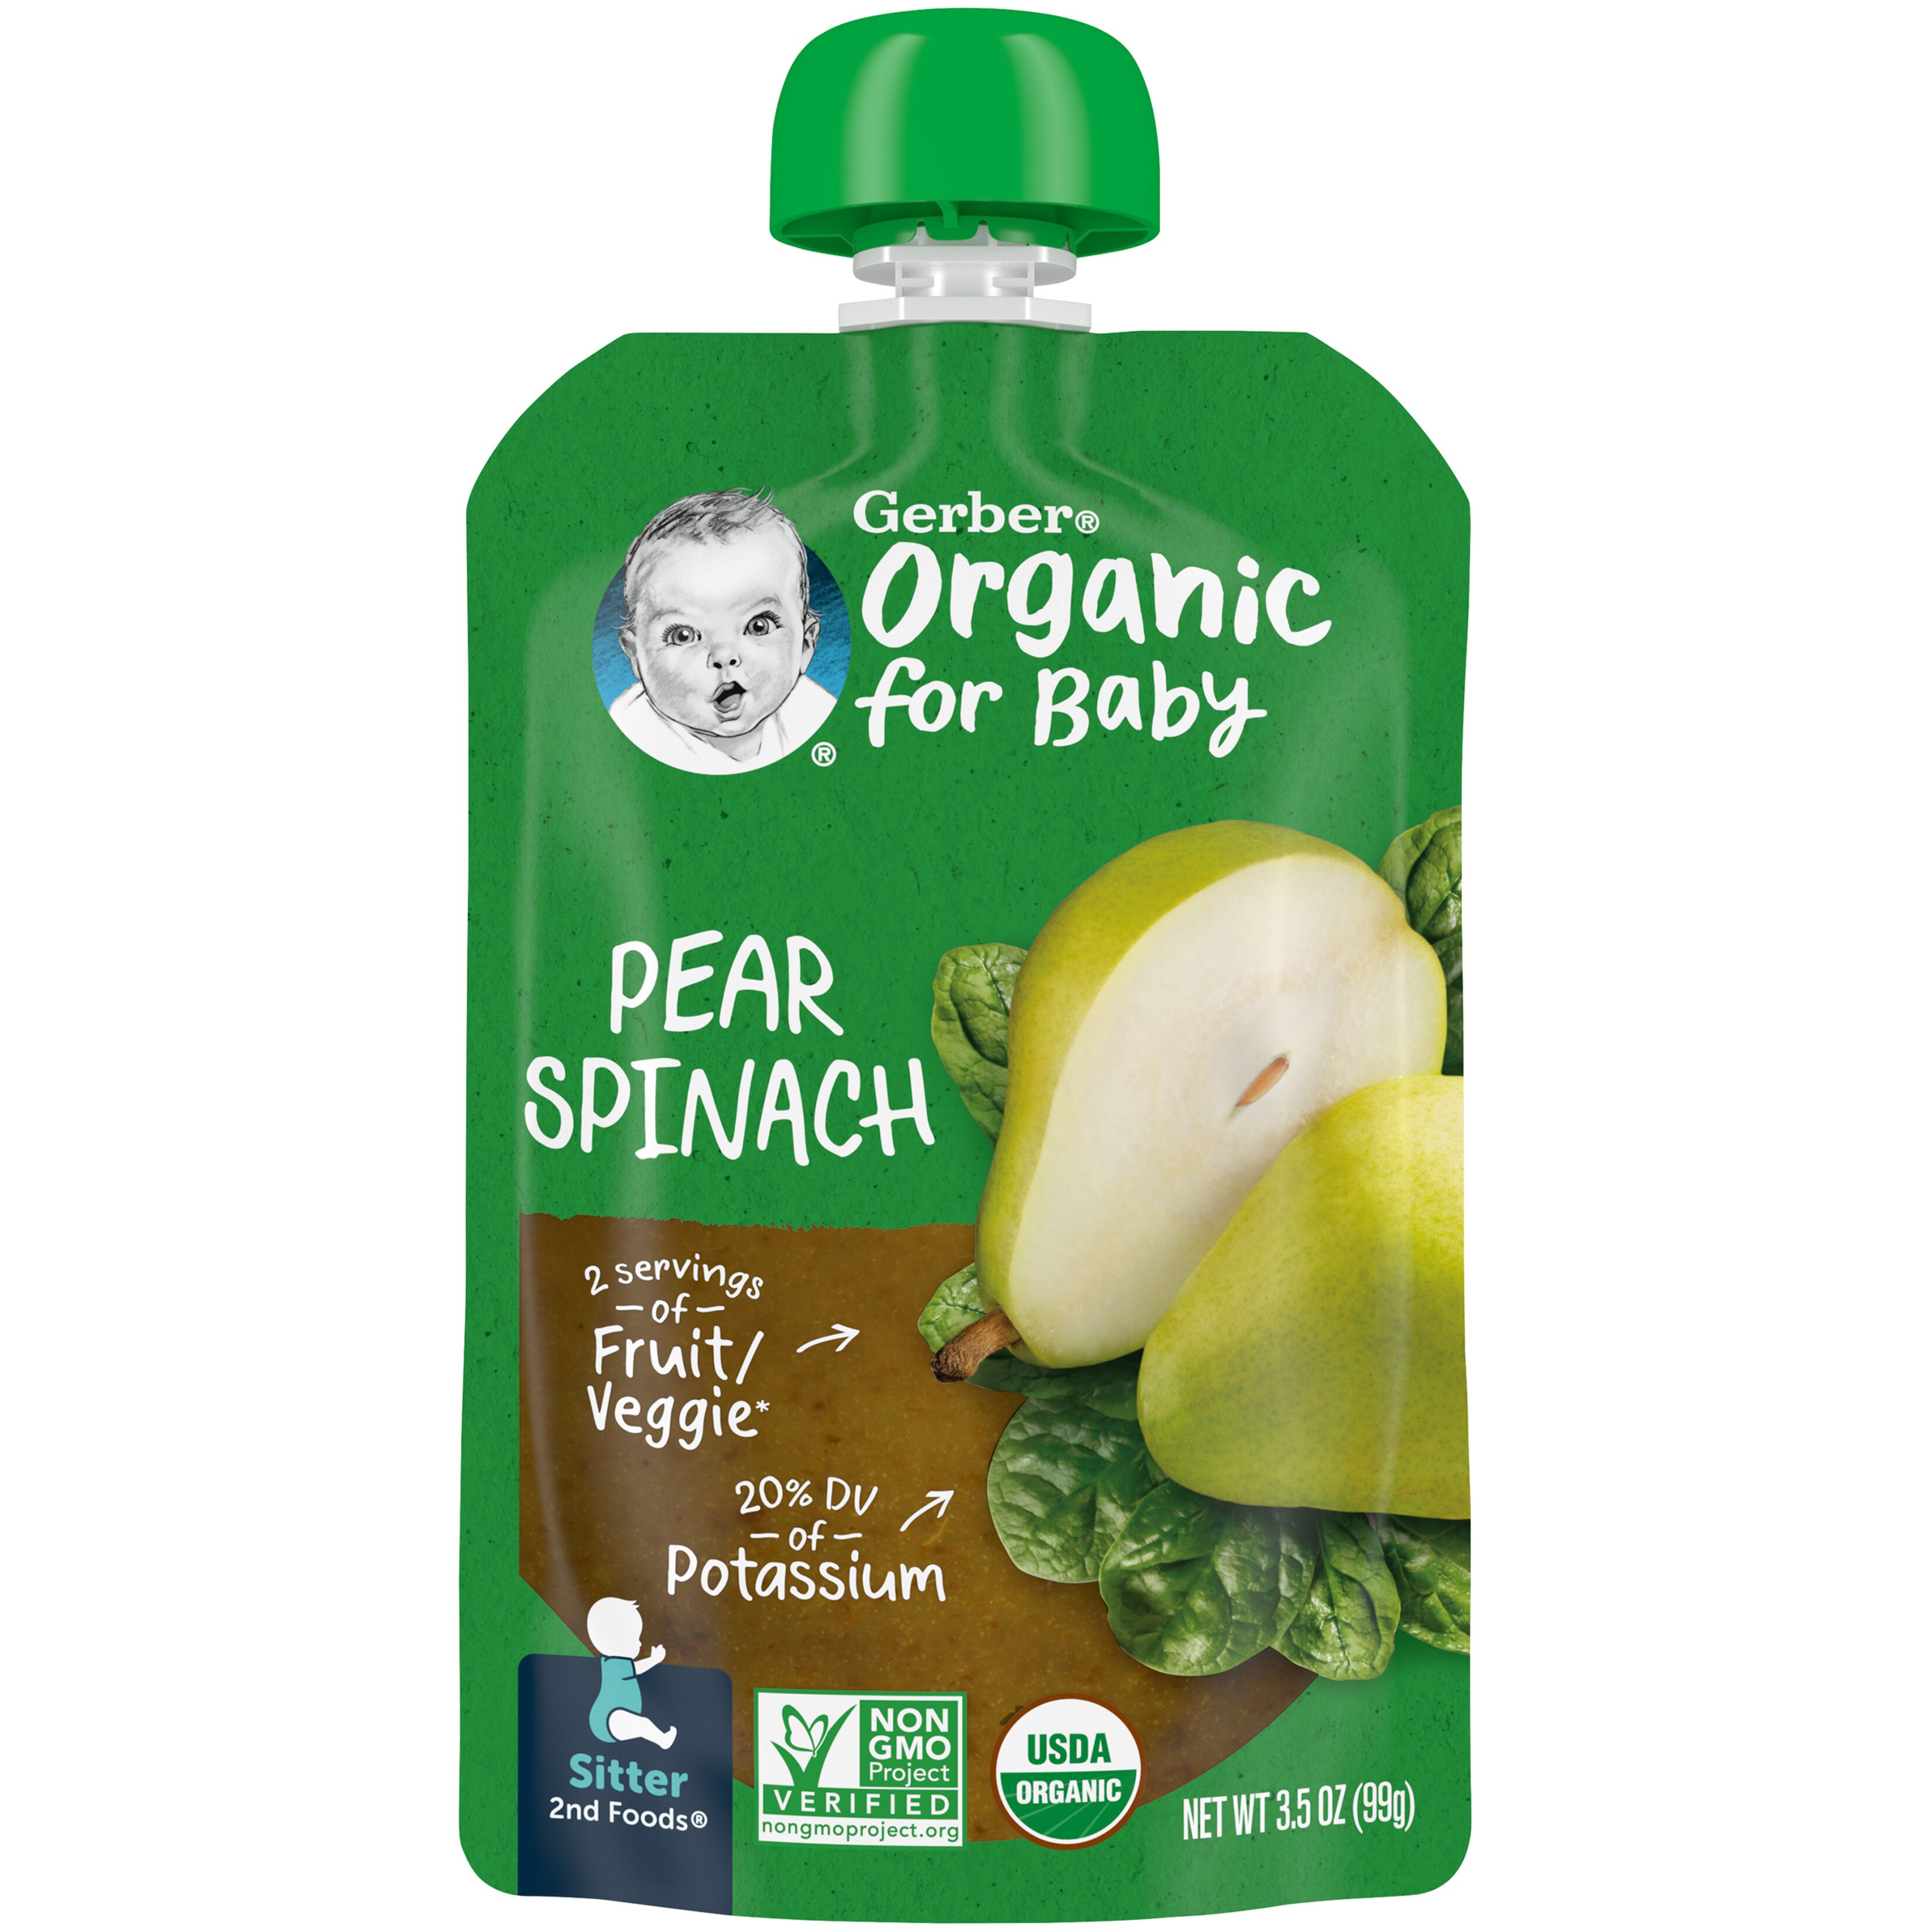 Gerber 2nd Foods Organic for Baby Baby Food, Pear Spinach, 3.5 oz Pouch